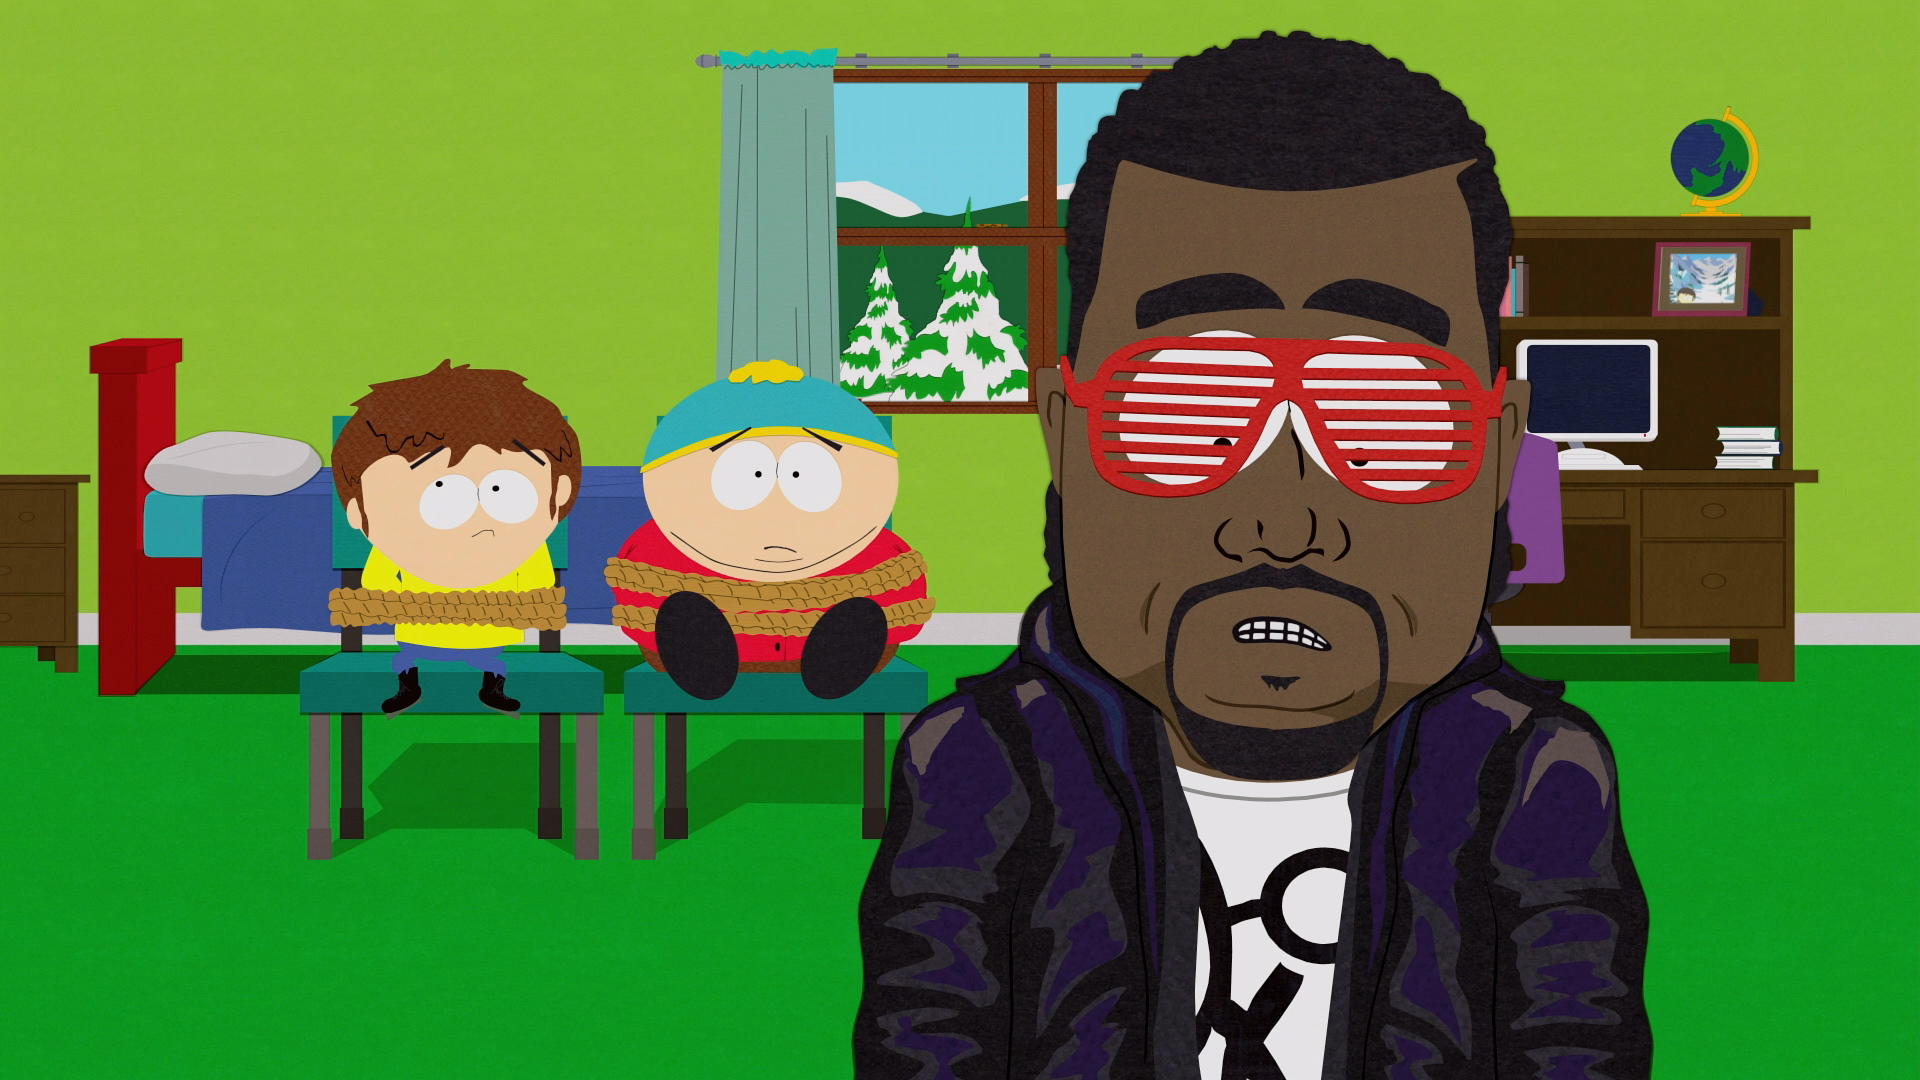 South Park Wallpapers HD kanye west